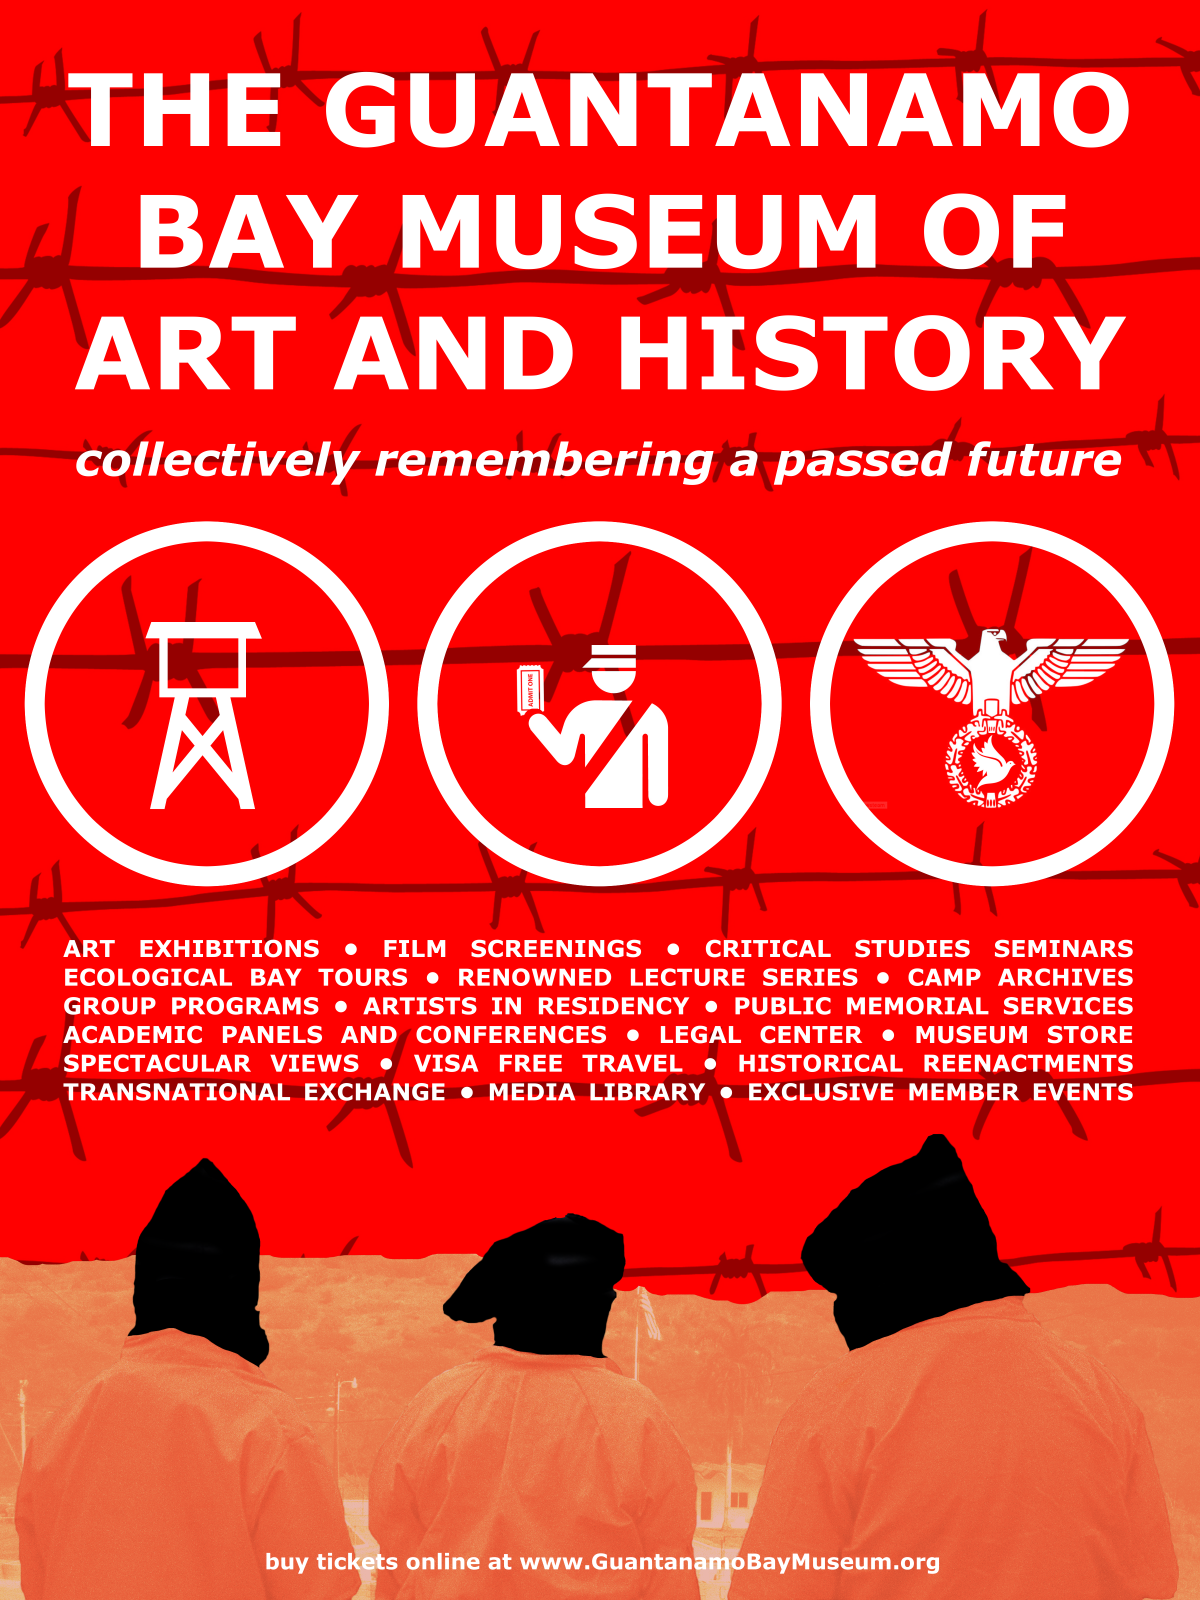 The Guantanamo Bay Museum of Art and History